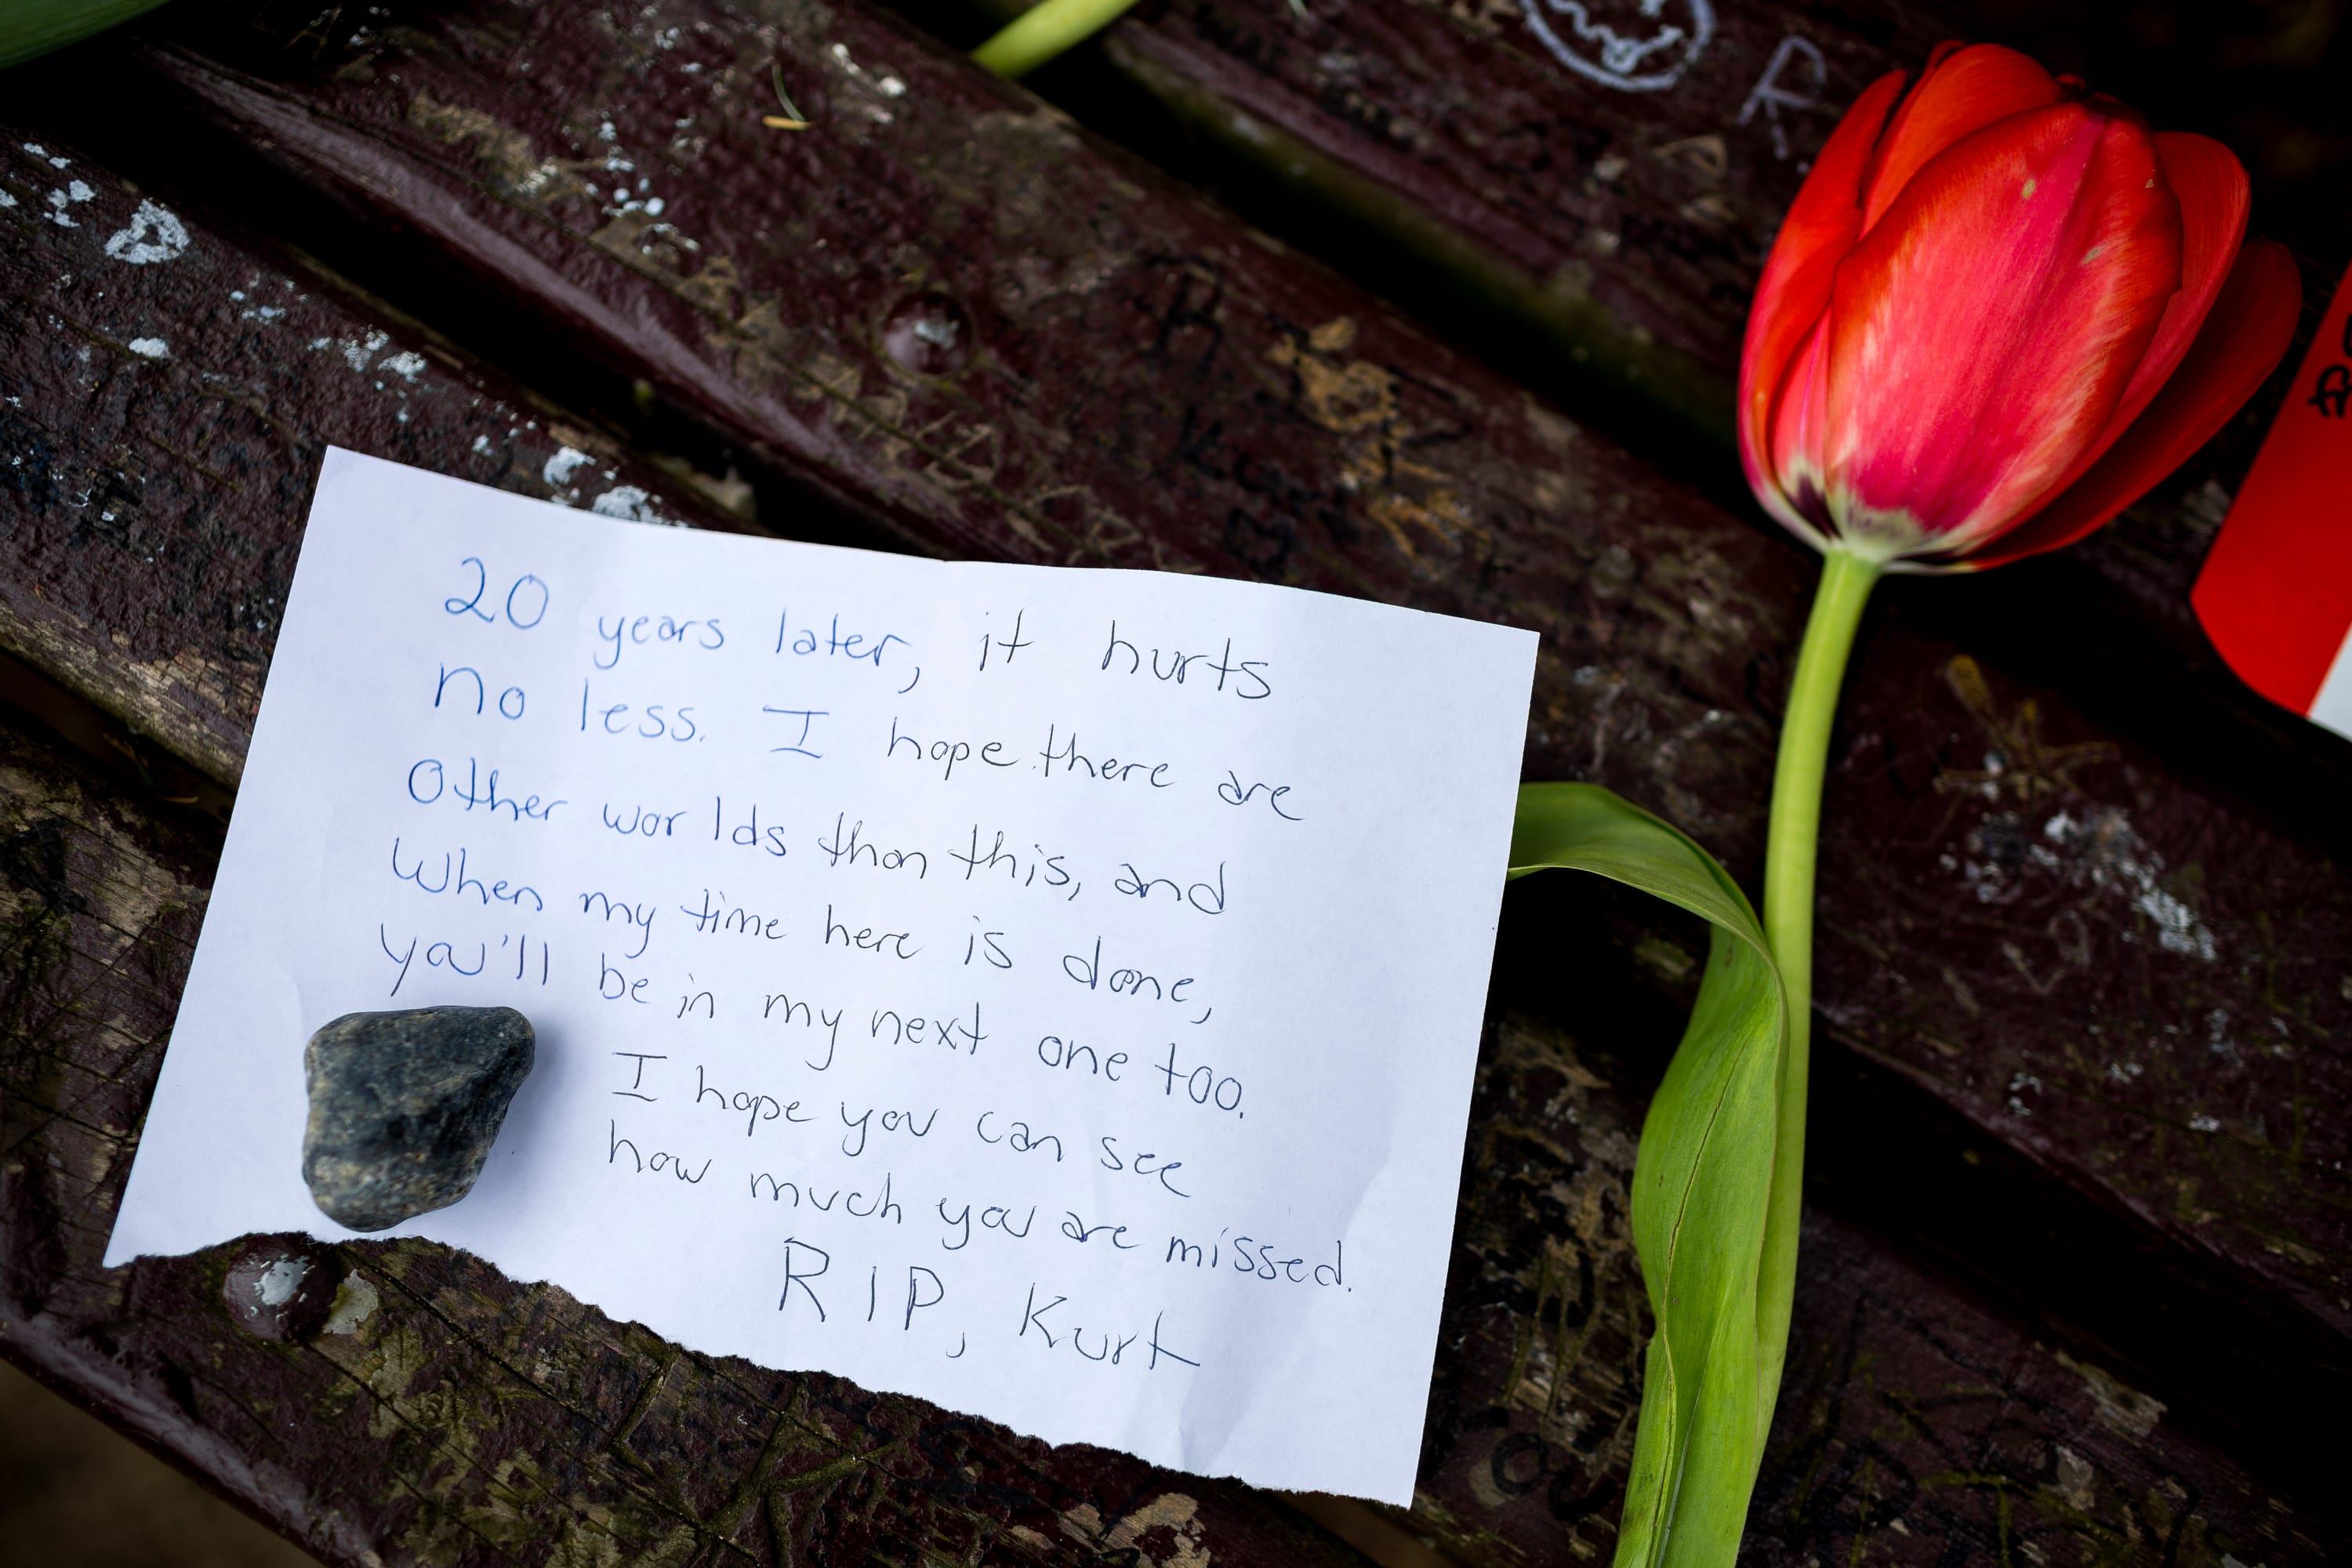 Fans of Nirvana's lead singer, Kurt Cobain, paid homage to the late rock icon with offerings of flowers, unopened beers and handwritten notes on a bench near the home where Cobain died on the 20th anniversary of his death April 5 at Viretta Park in Seattle.